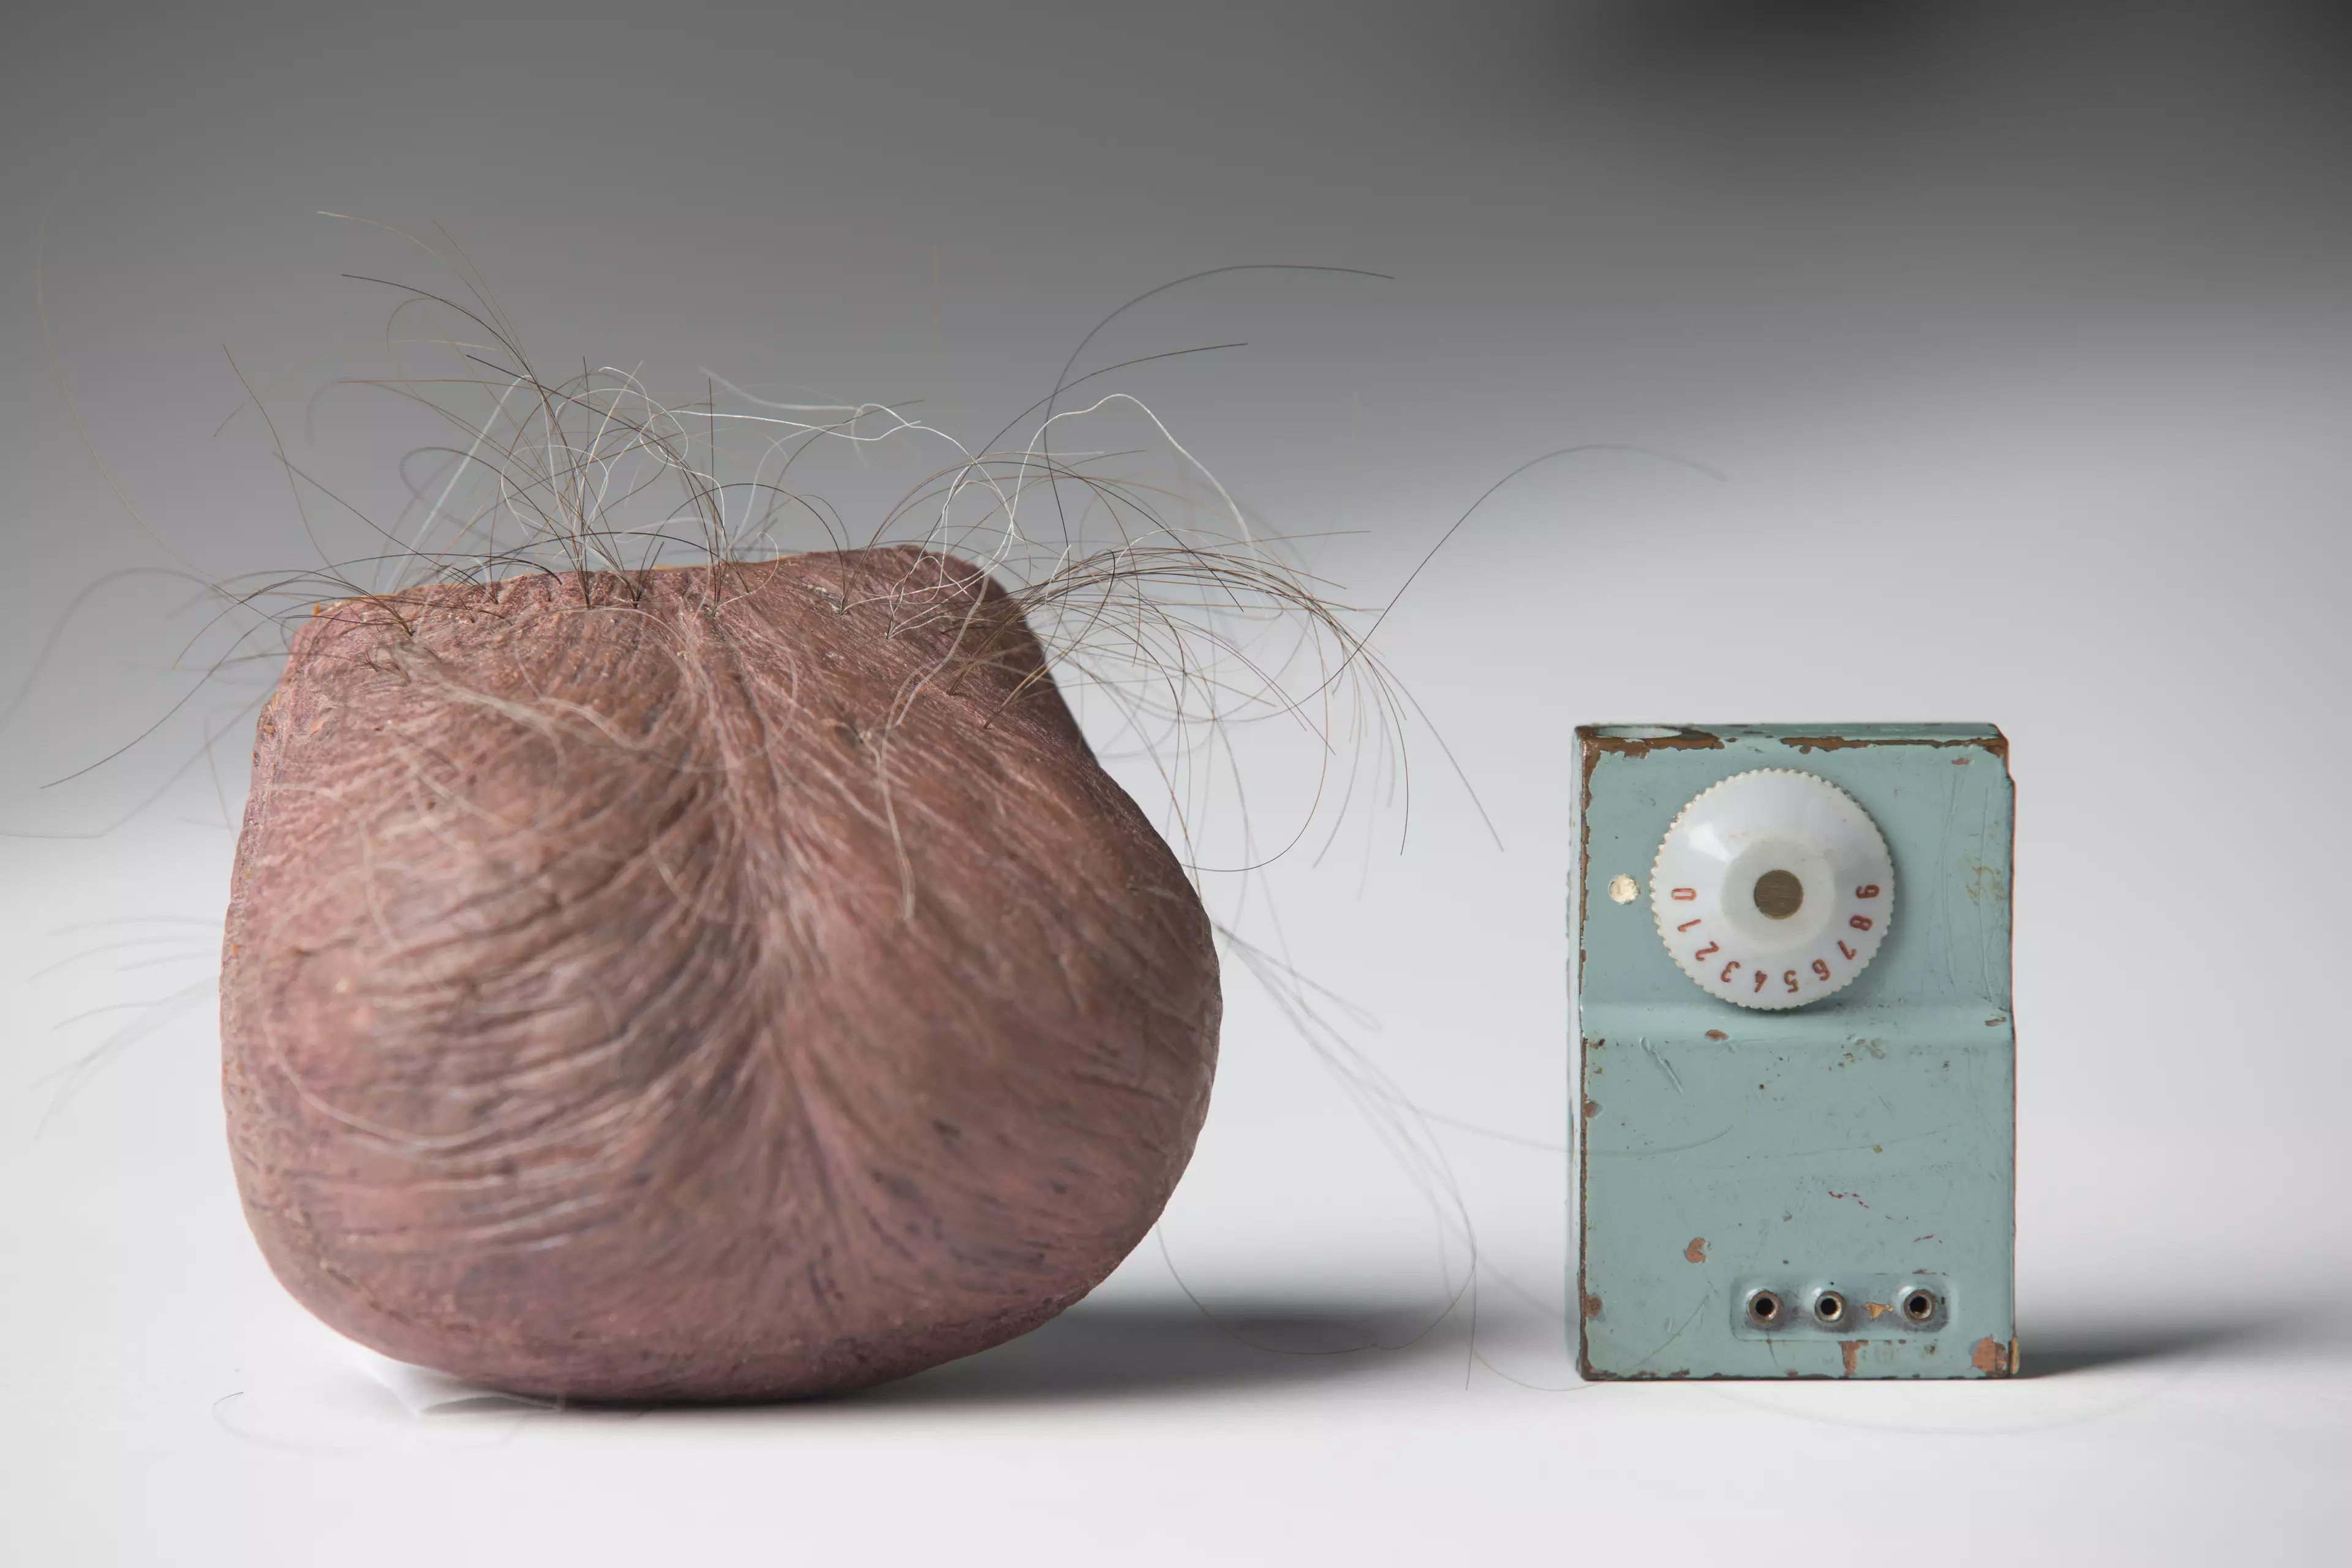 The CIA developed this fake scrotum to conceal an escape radio.